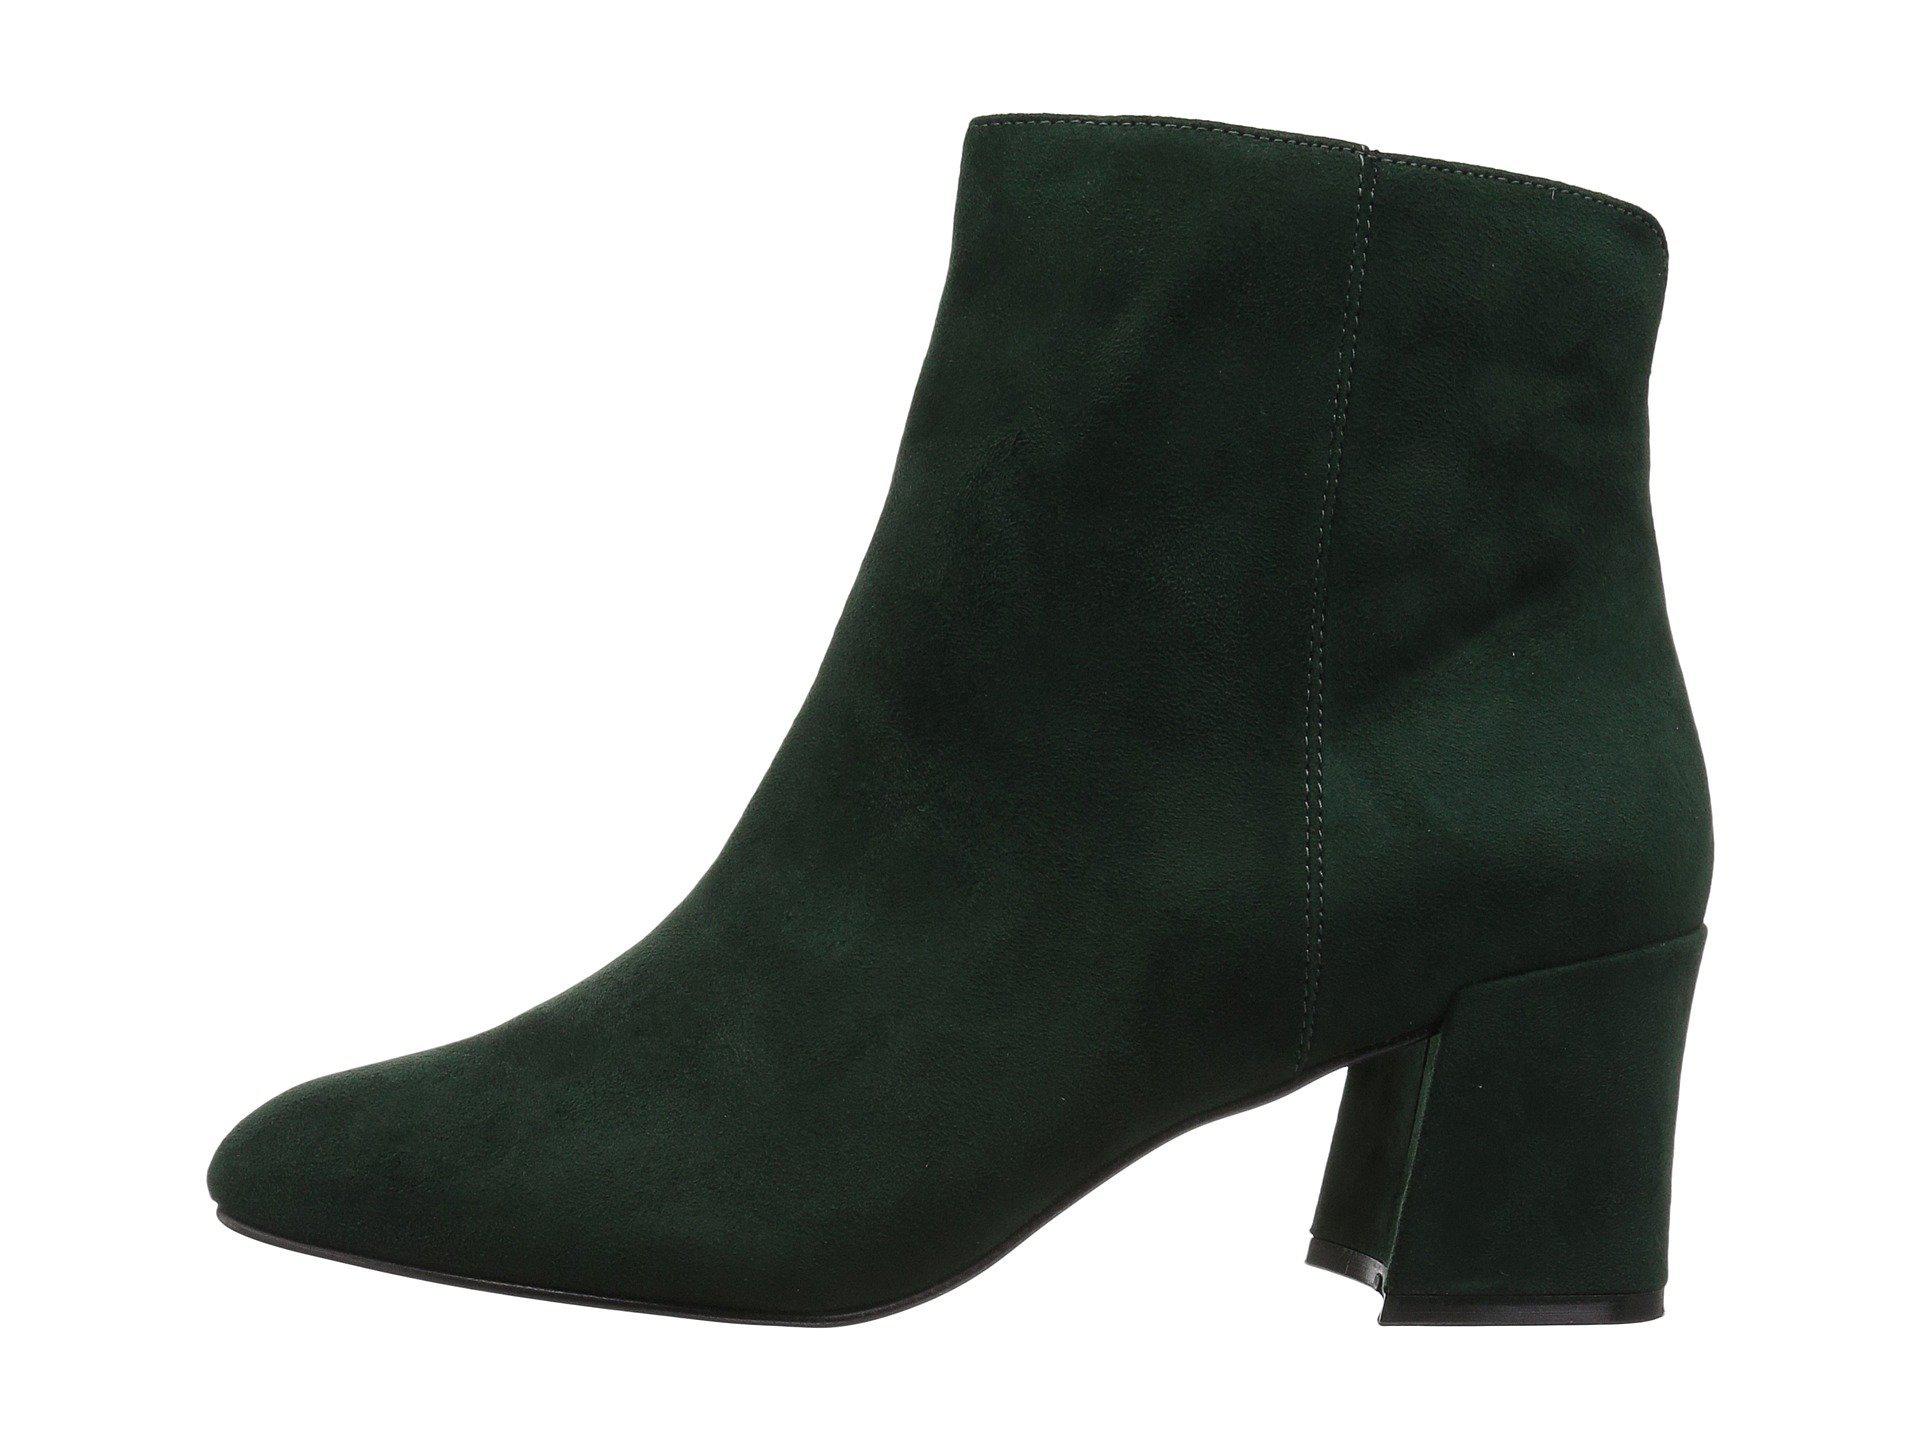 Chinese Laundry Daria Ankle Boot in Forest Green Suede (Green) - Lyst